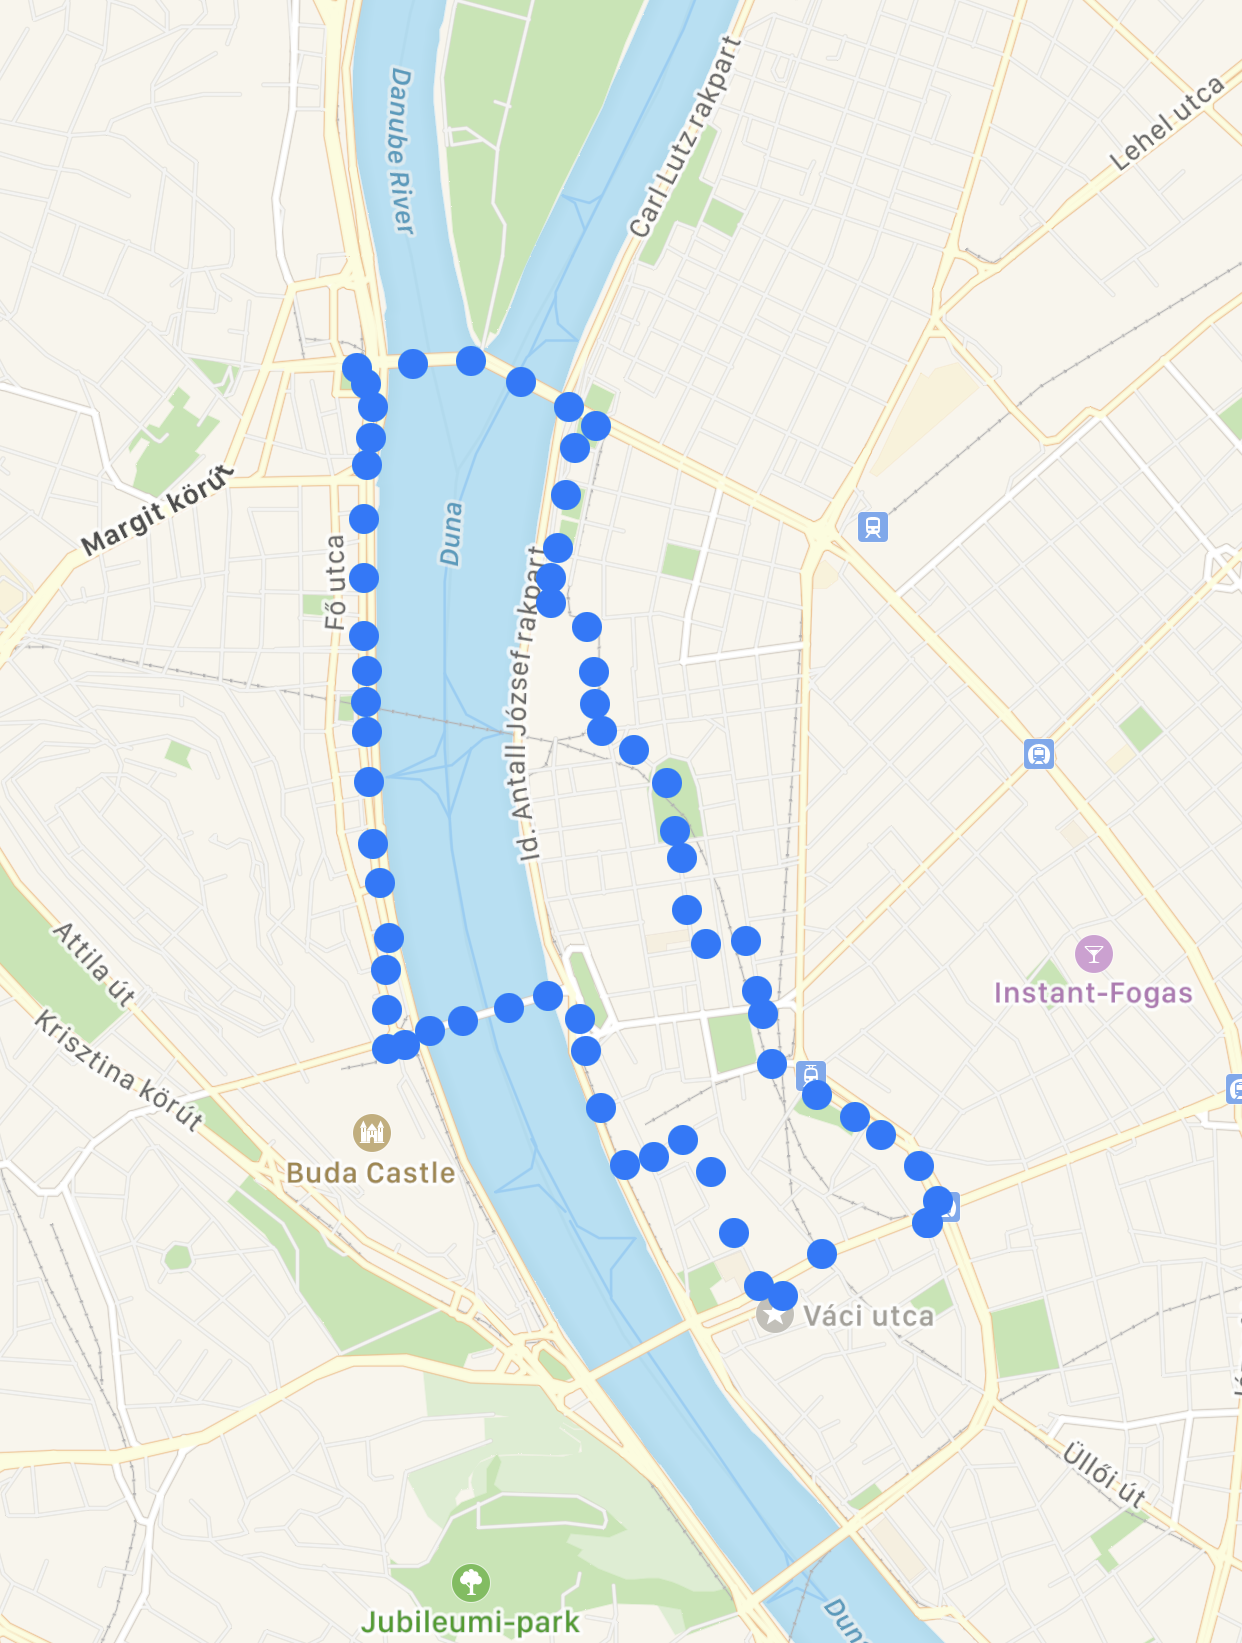 Map of Budapest with a route map of a workout overlaid at a high zoom level showing loss of detail